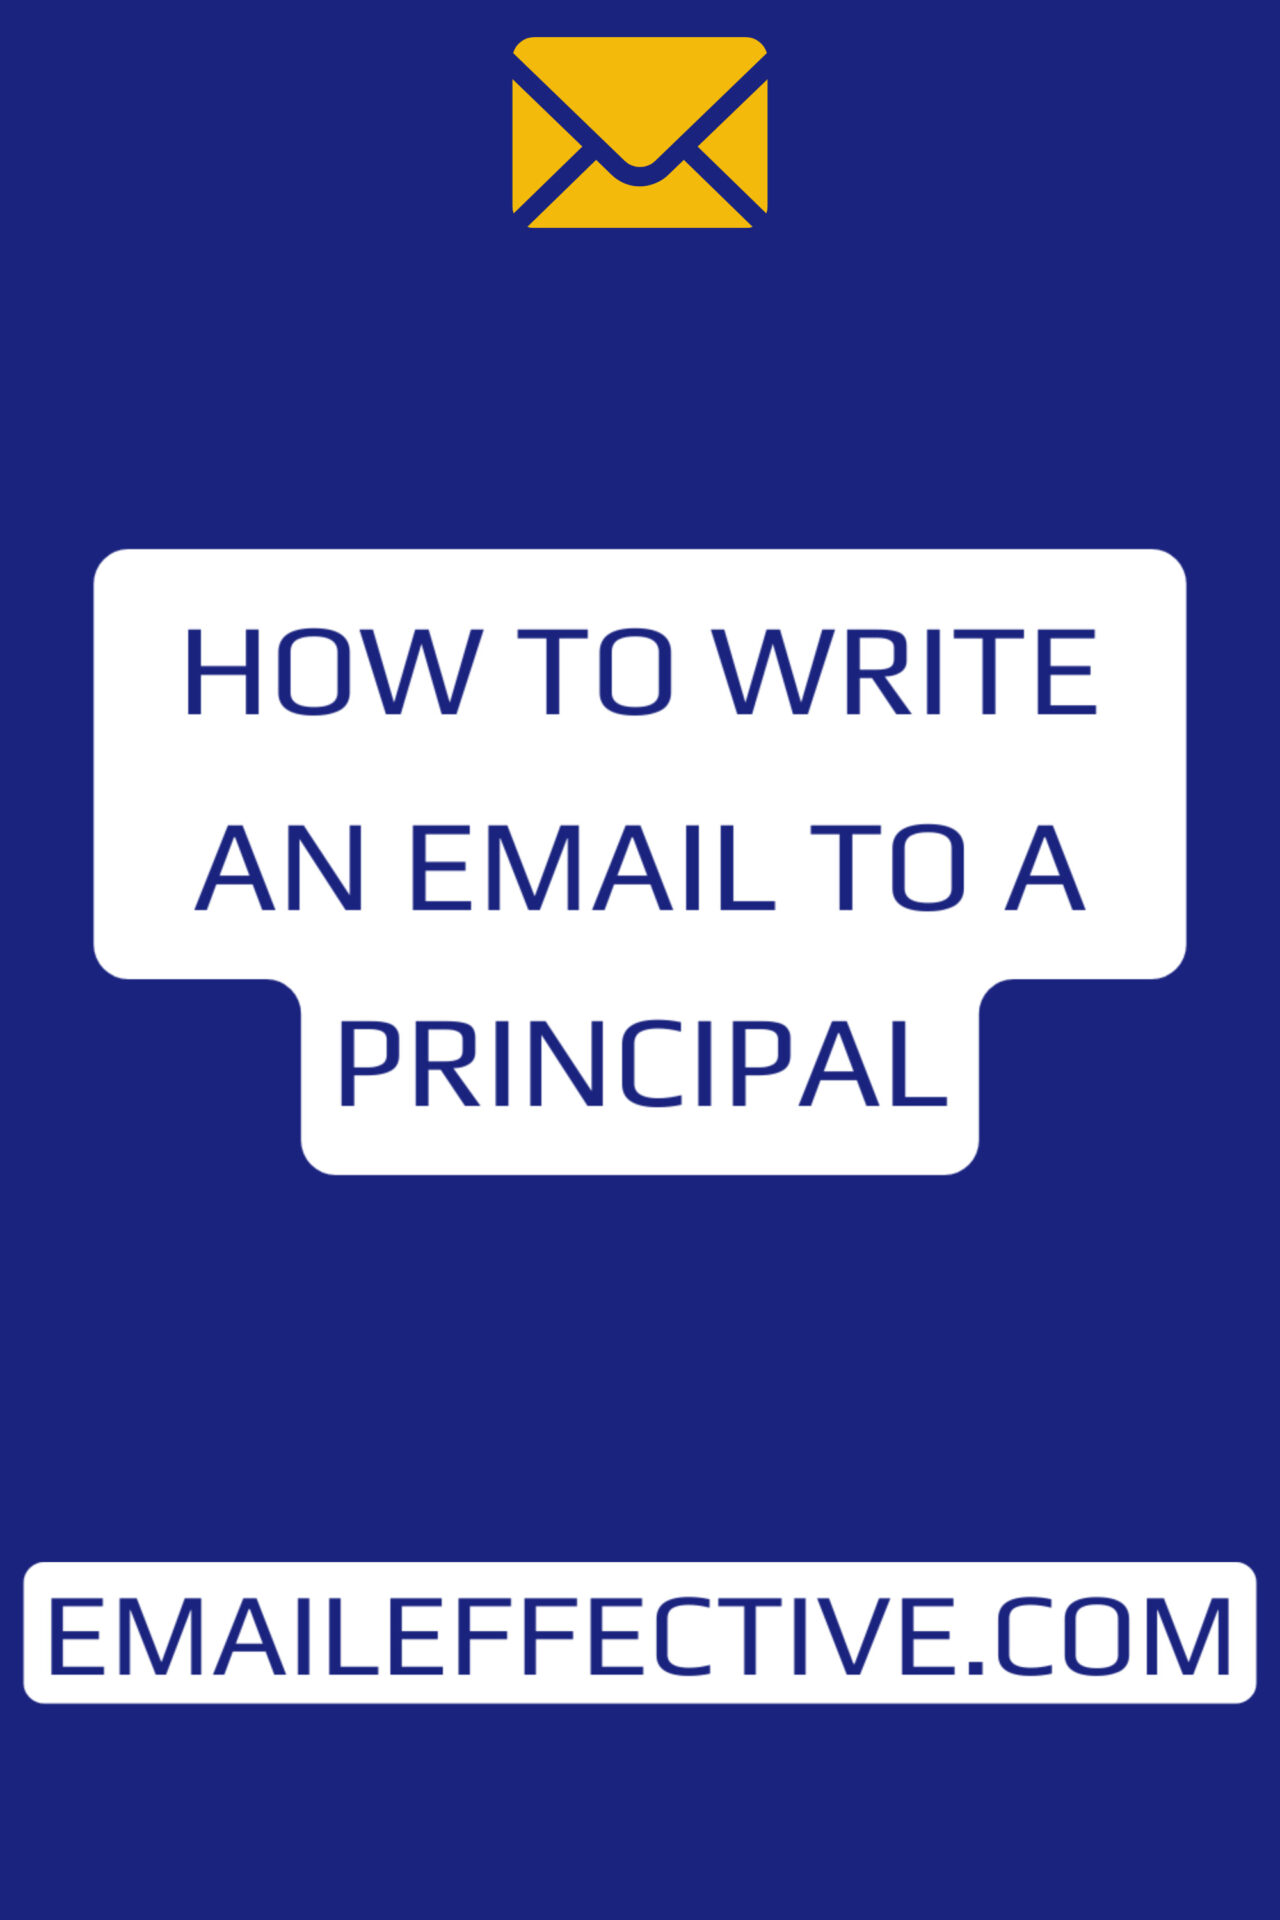 How to Write an Email to A Principal